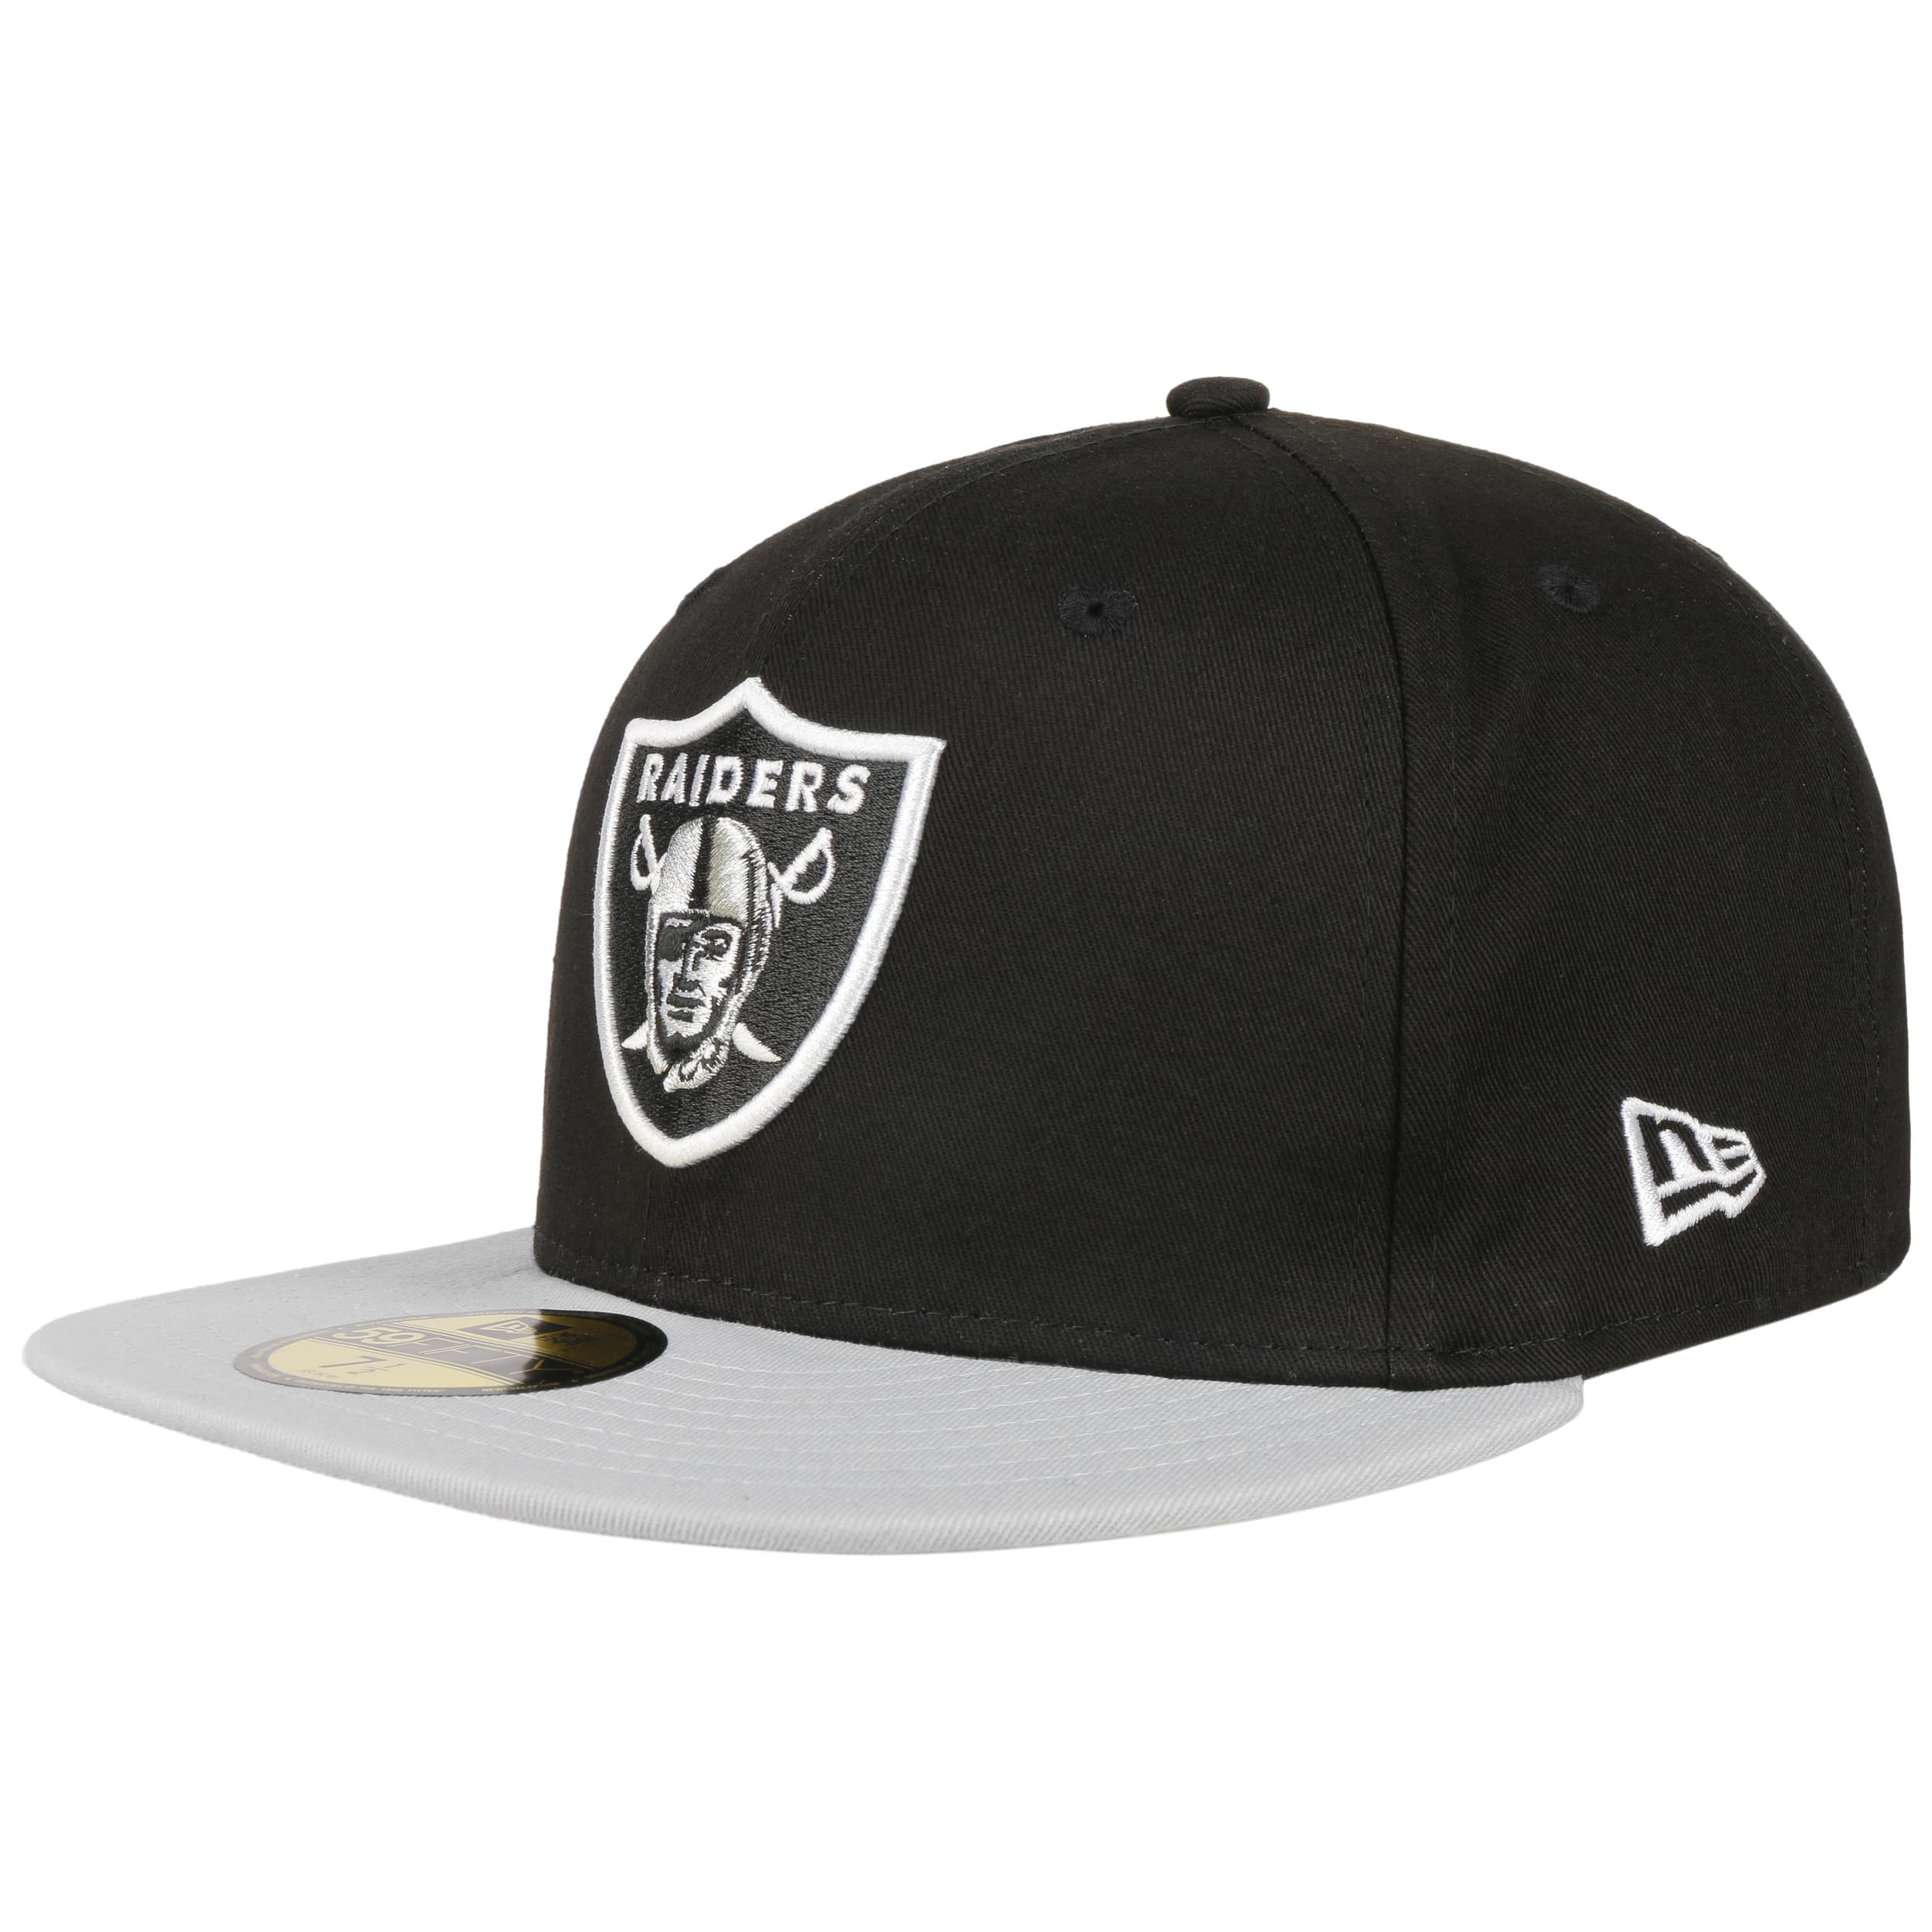 59Fifty NFL Raiders City Patch Cap by New Era - 48,95 €